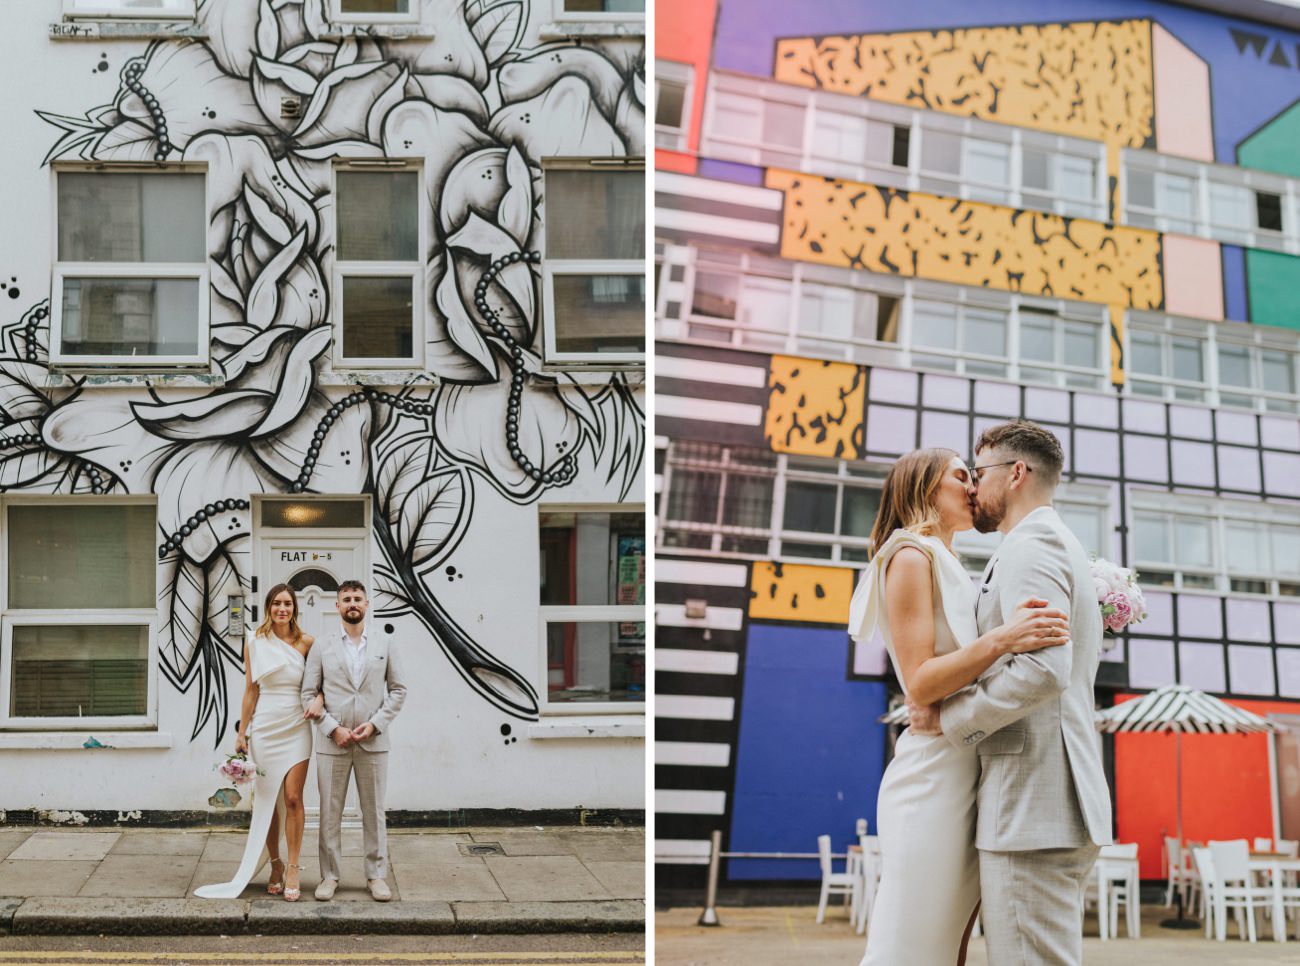 Bride and Groom kissing in front of street art in Shoreditch London.